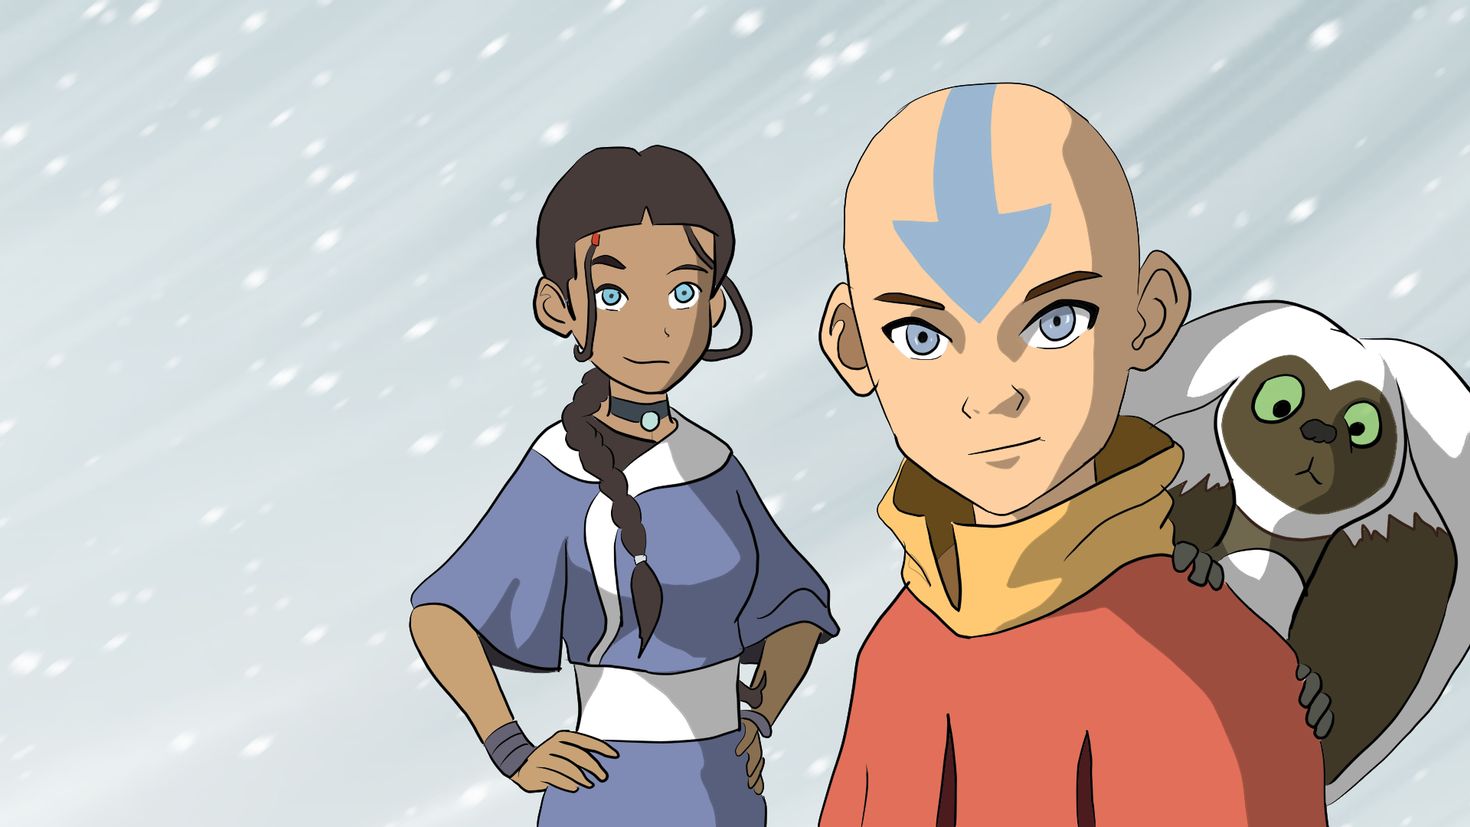 Avatar the last airbender subtitles. Аватар. МОМО аватар аанг.